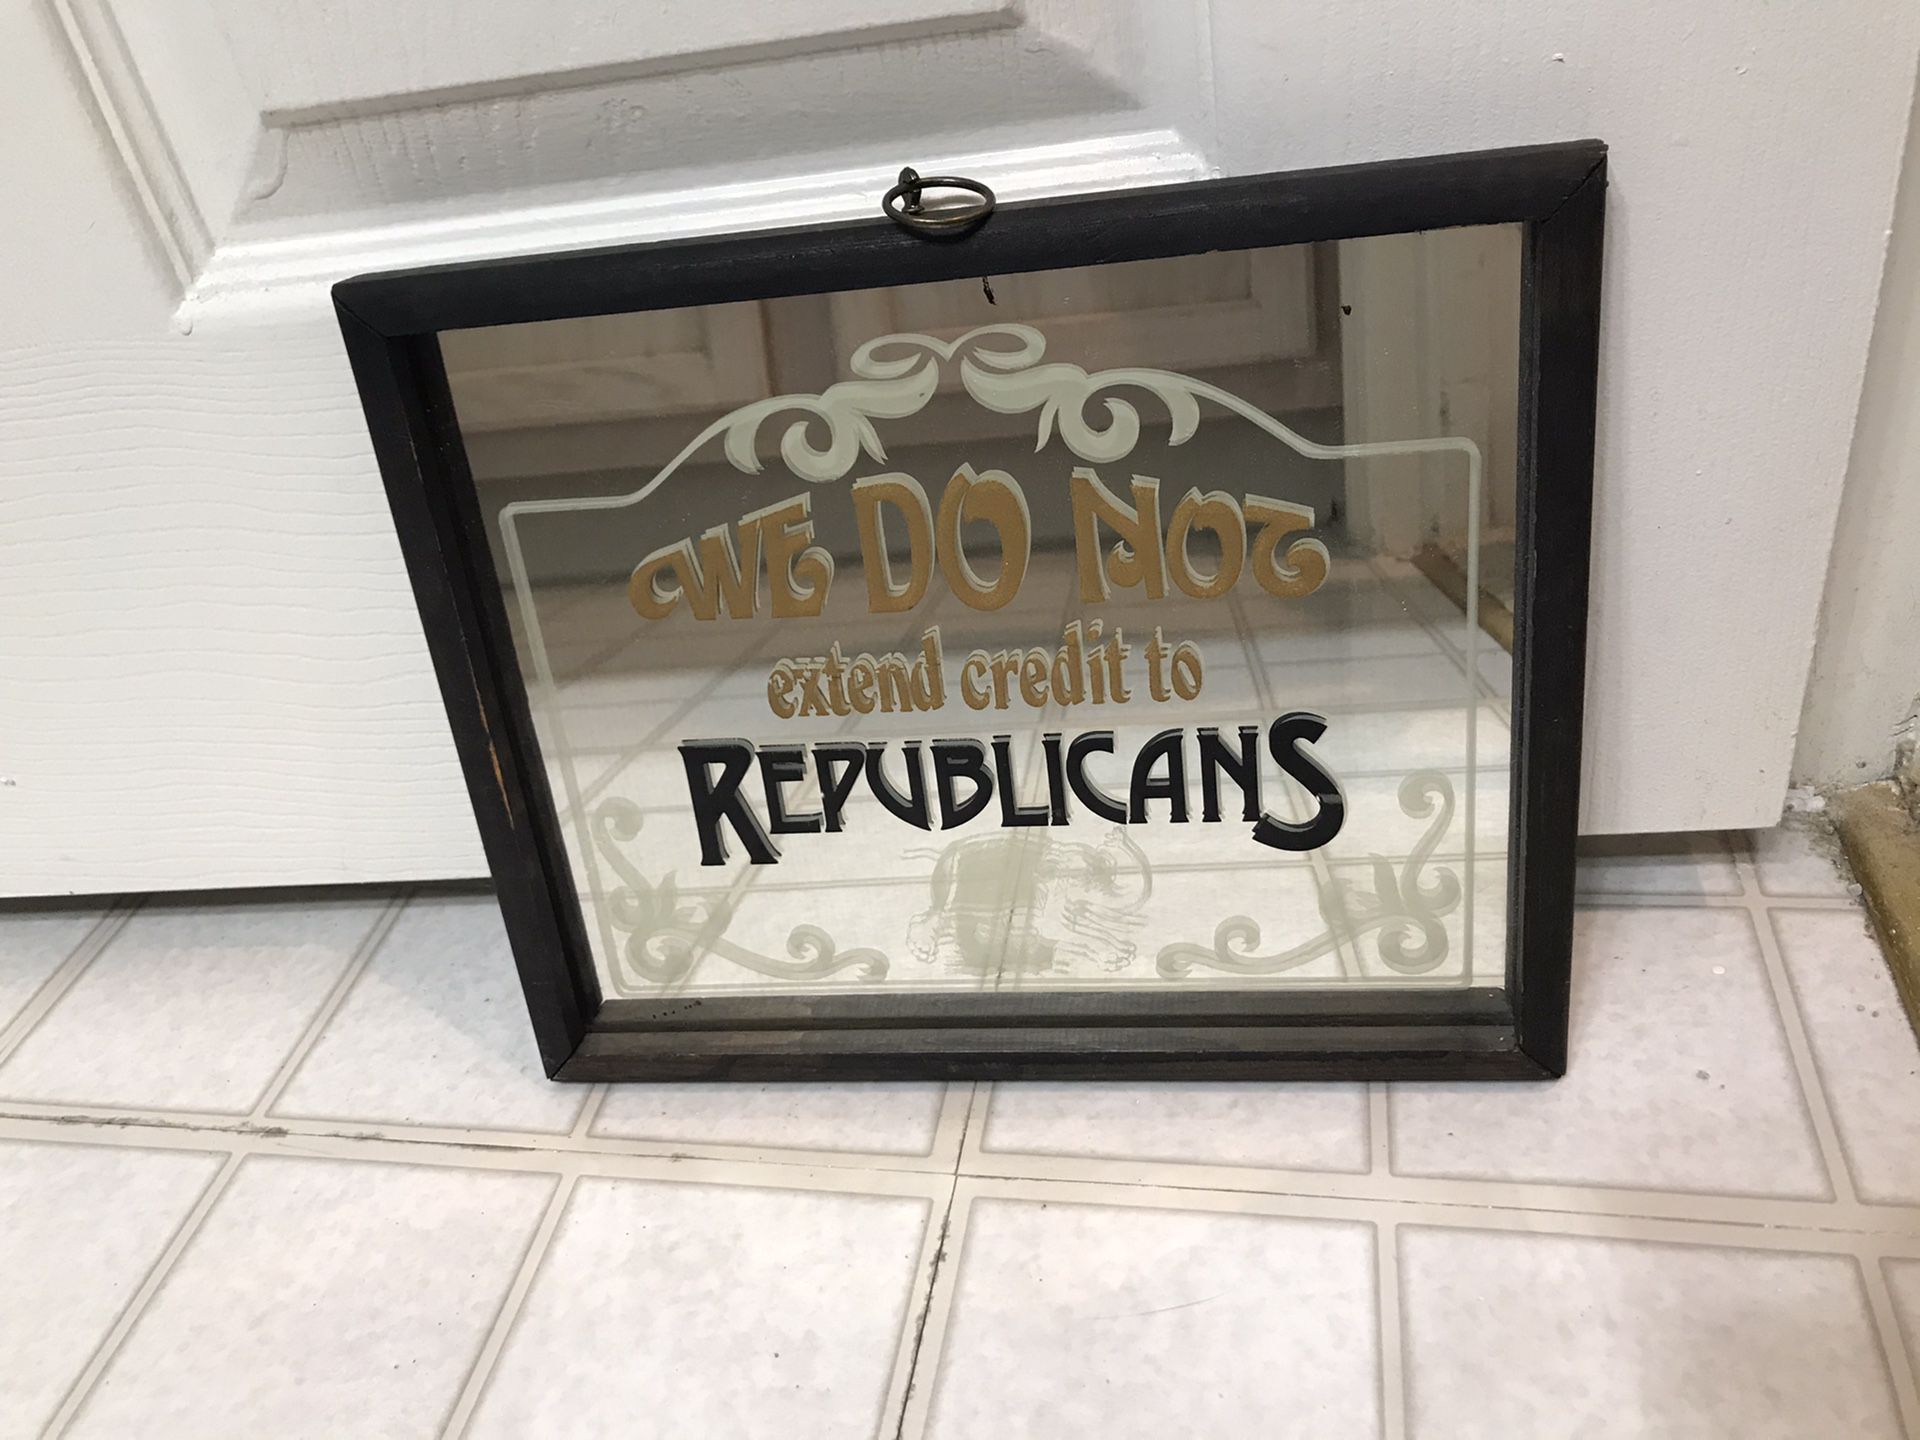 Mirrored Wall Hanging Sign - "We do not extend credit to Republicans"